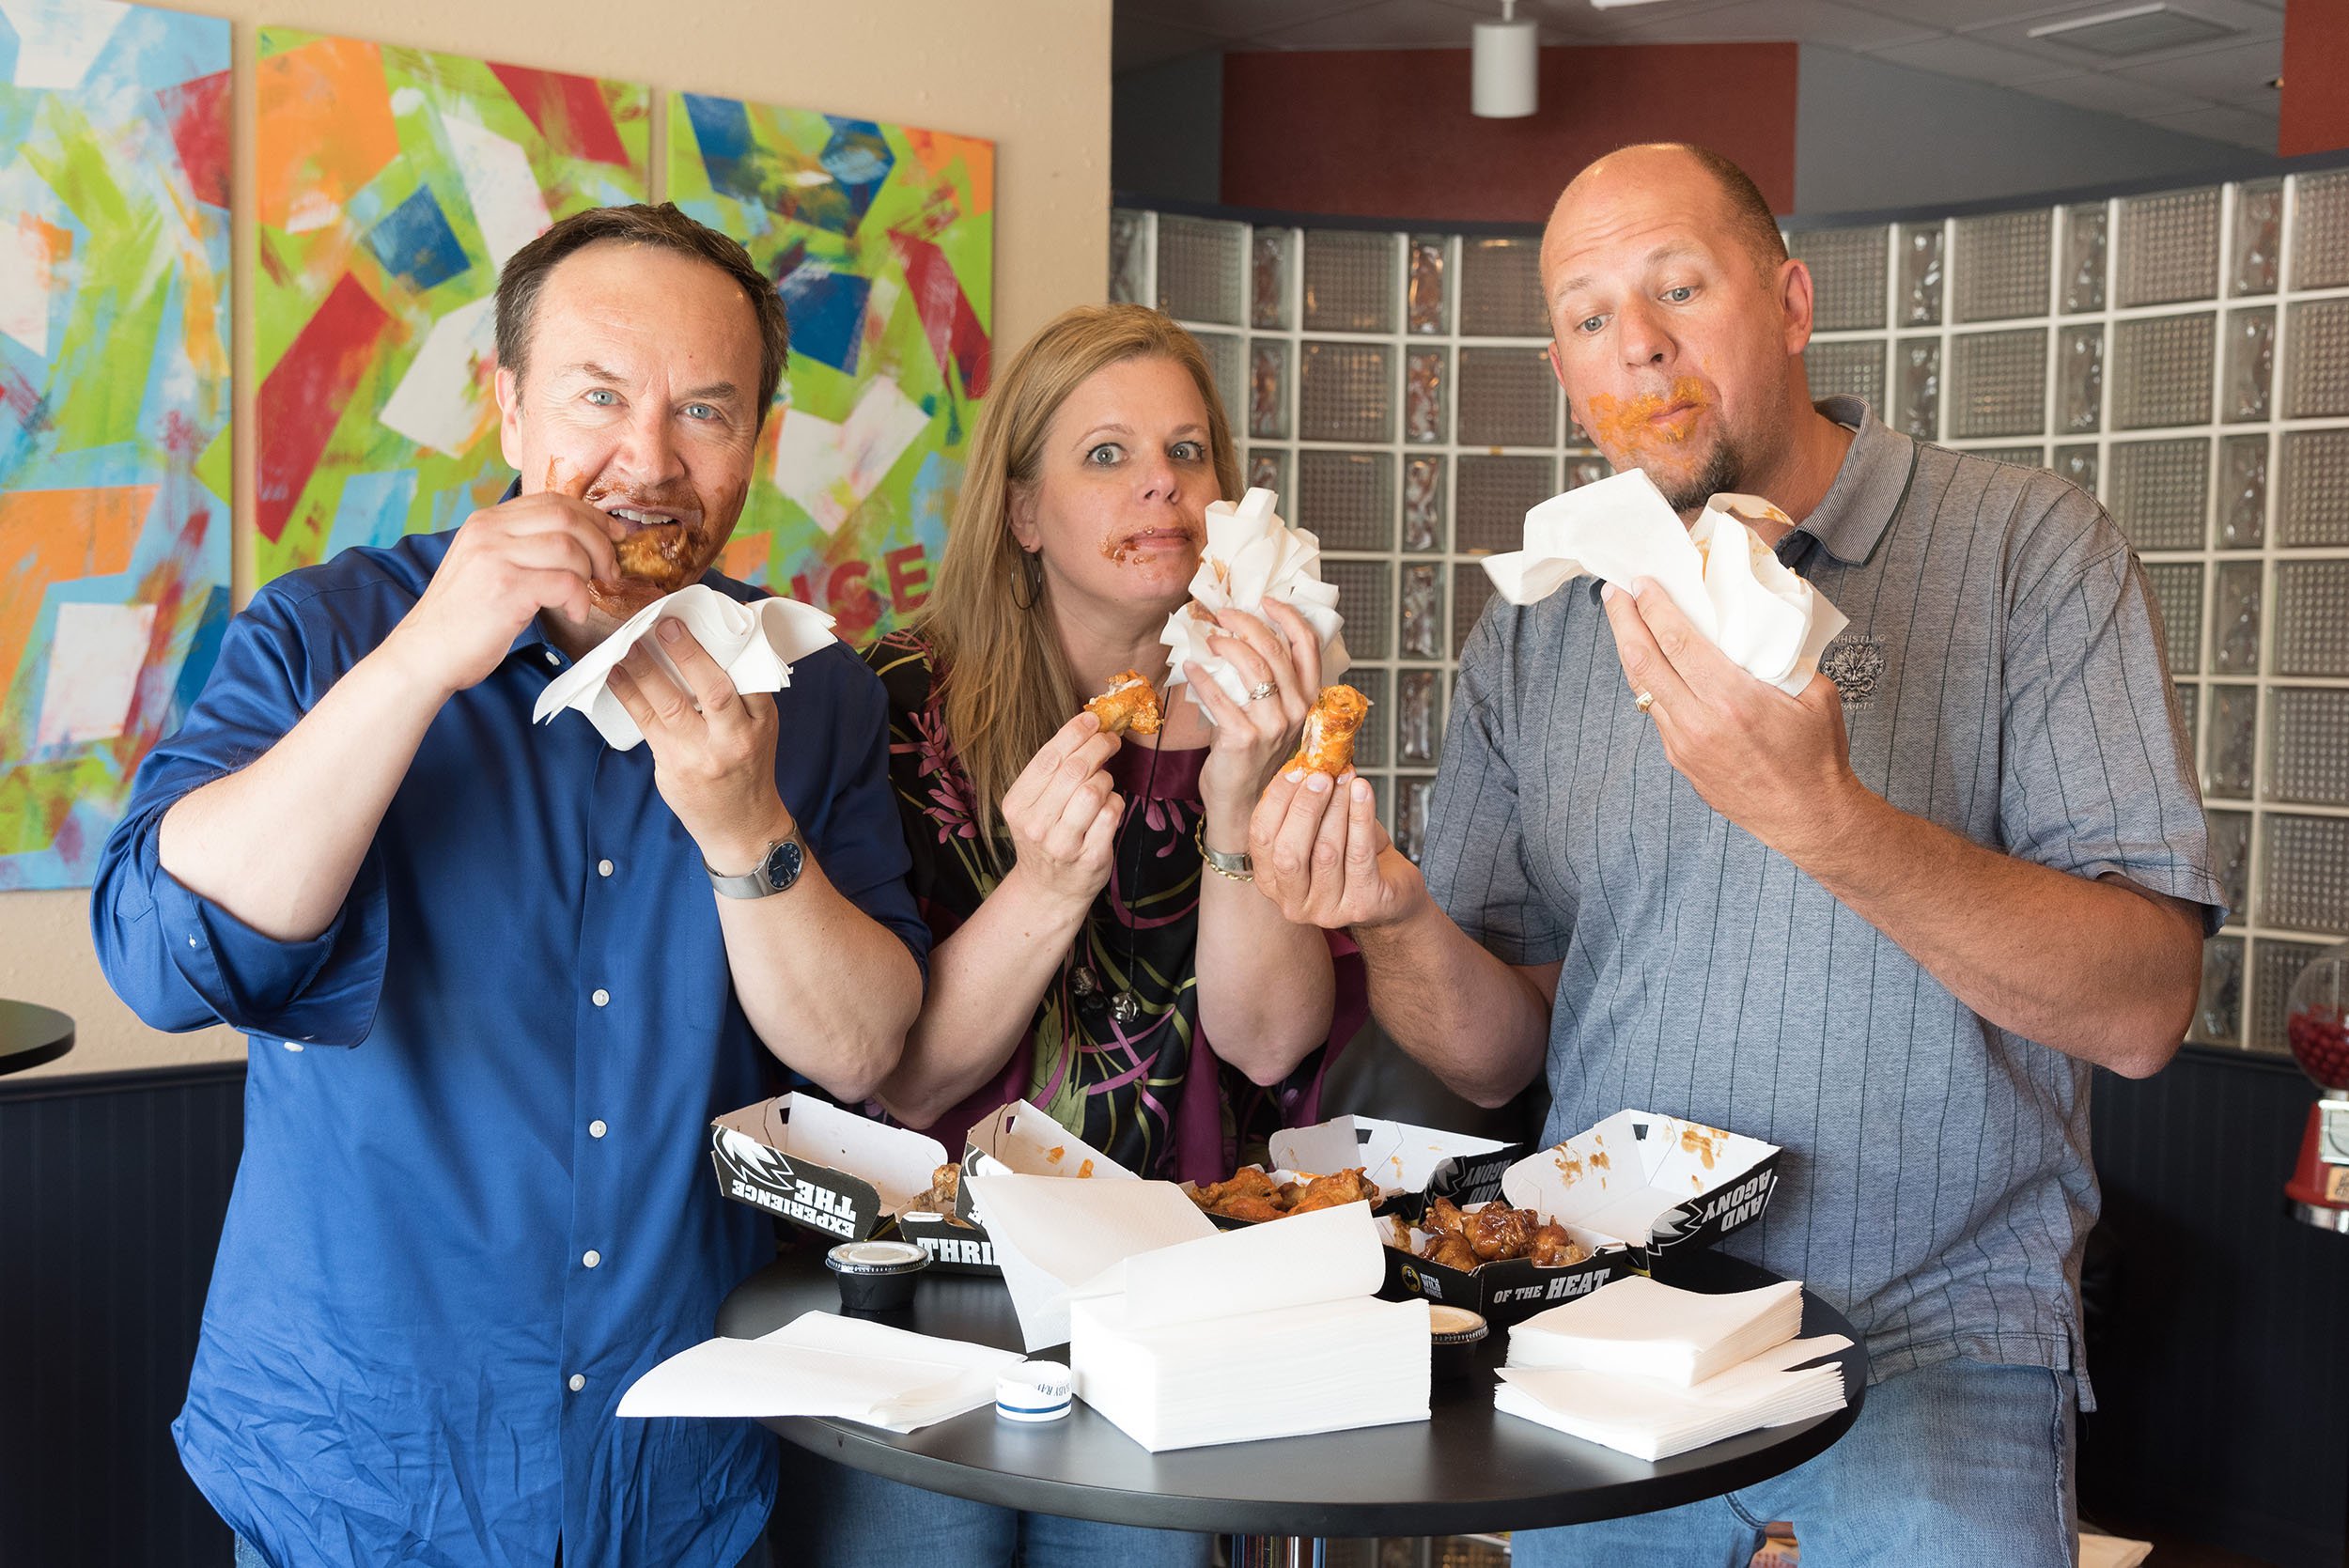 Portrait of group eating wings